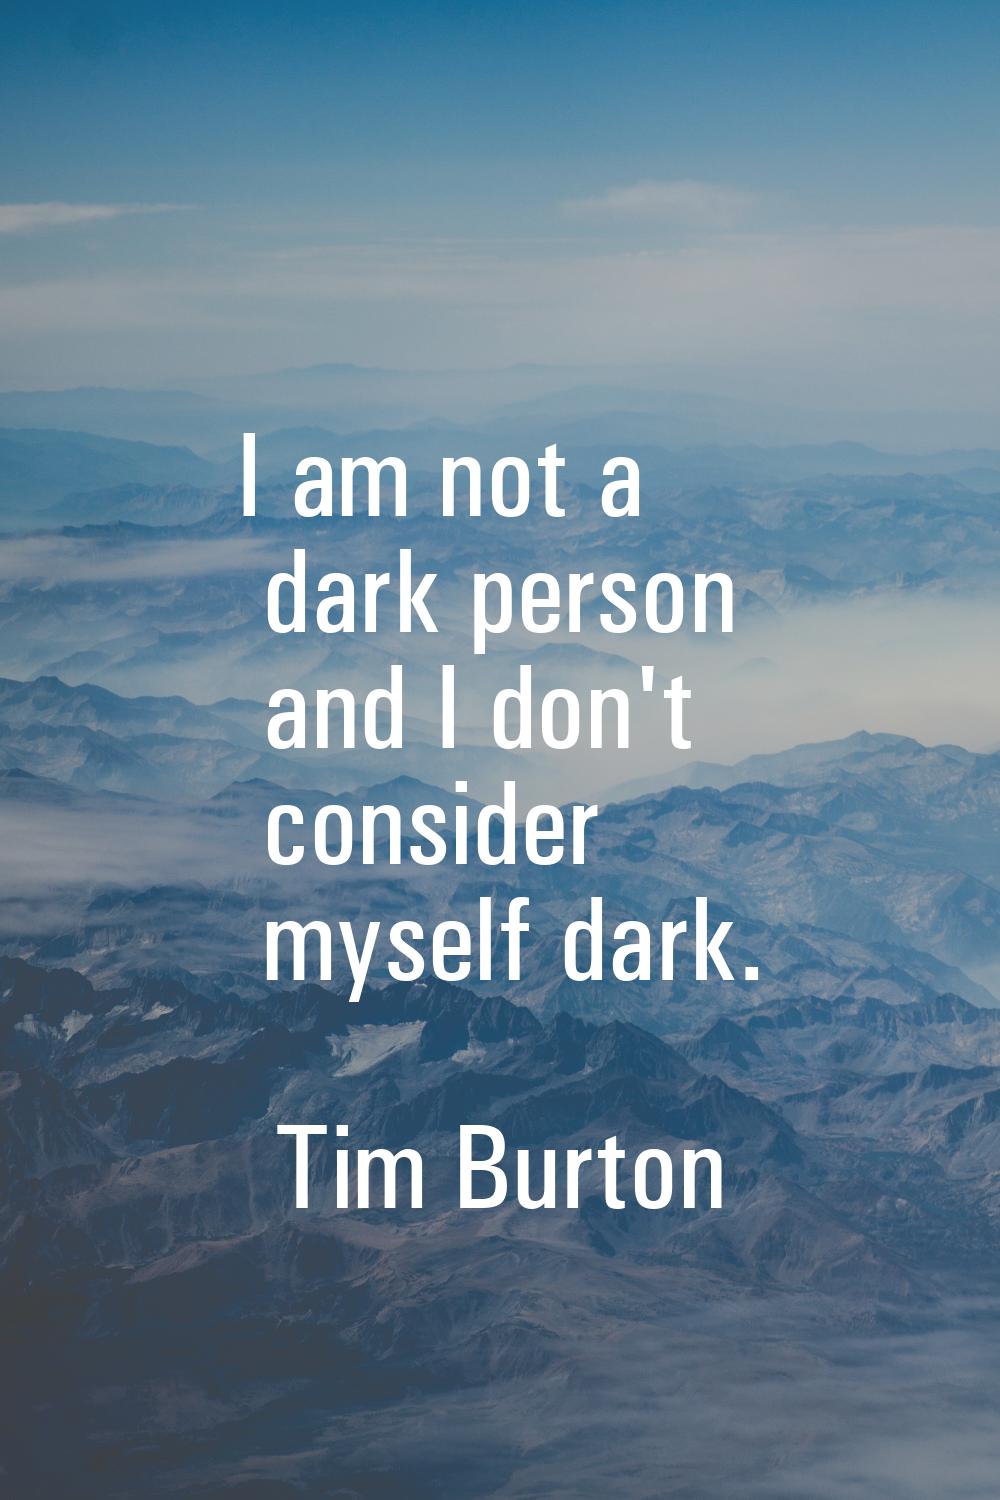 I am not a dark person and I don't consider myself dark.